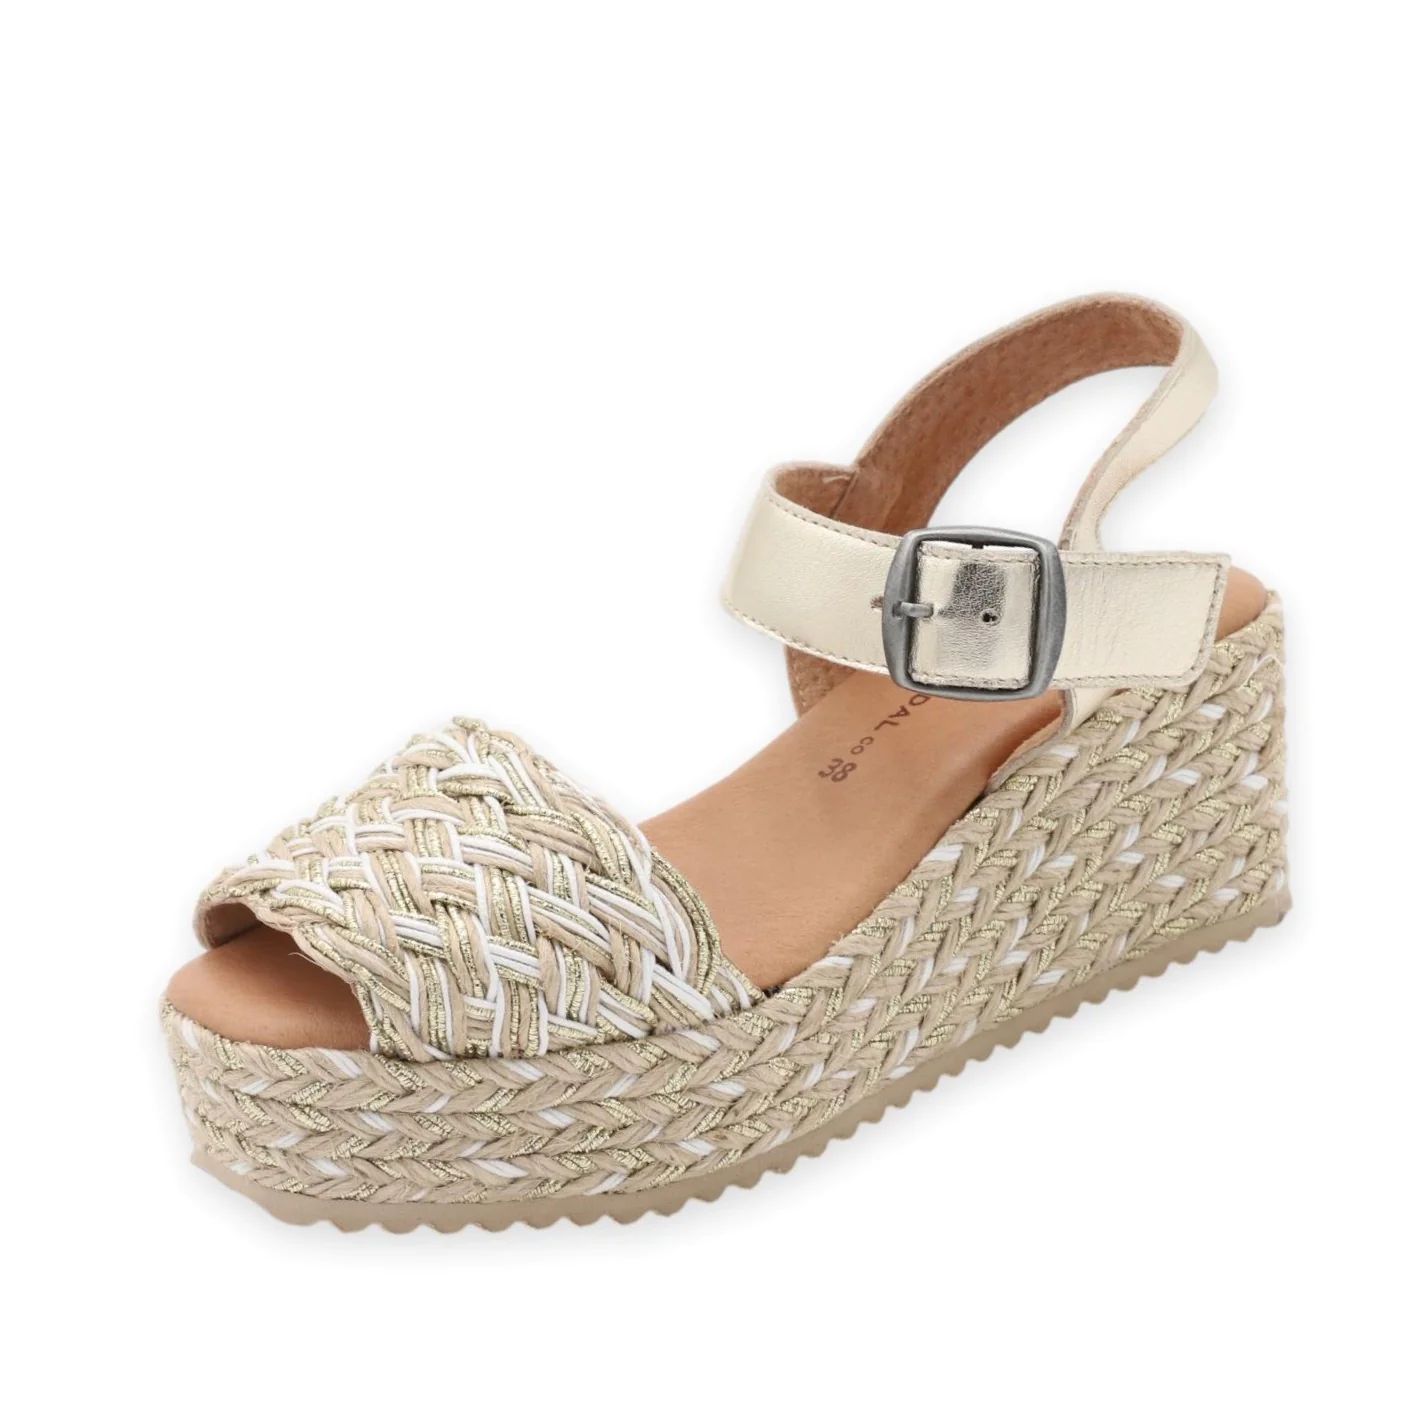 Gold braided platform sandals with strap | The Spanish Sandal Company